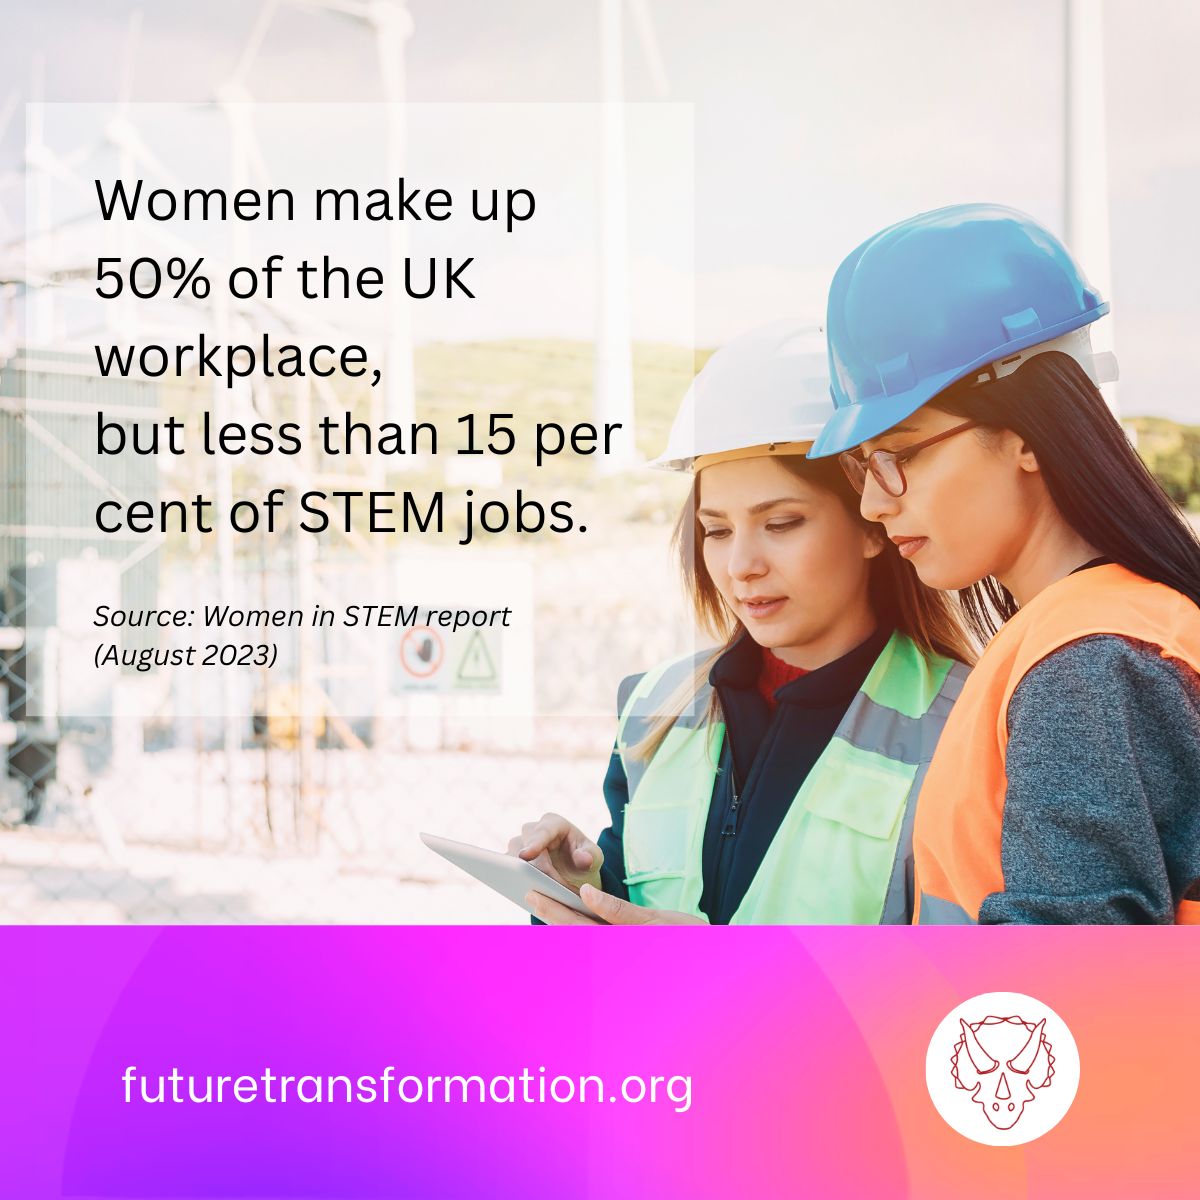 Today we would like to share some steps to boost the % of #womeninSTEM:
🚀 #Mentorship Programmes
📚 #Education and Outreach
💪 Highlight #RoleModels
🏢 #Inclusive Workplace Culture
What would you add?
#DiversityInTech #STEMEmpowerment 🚀👩‍🔬